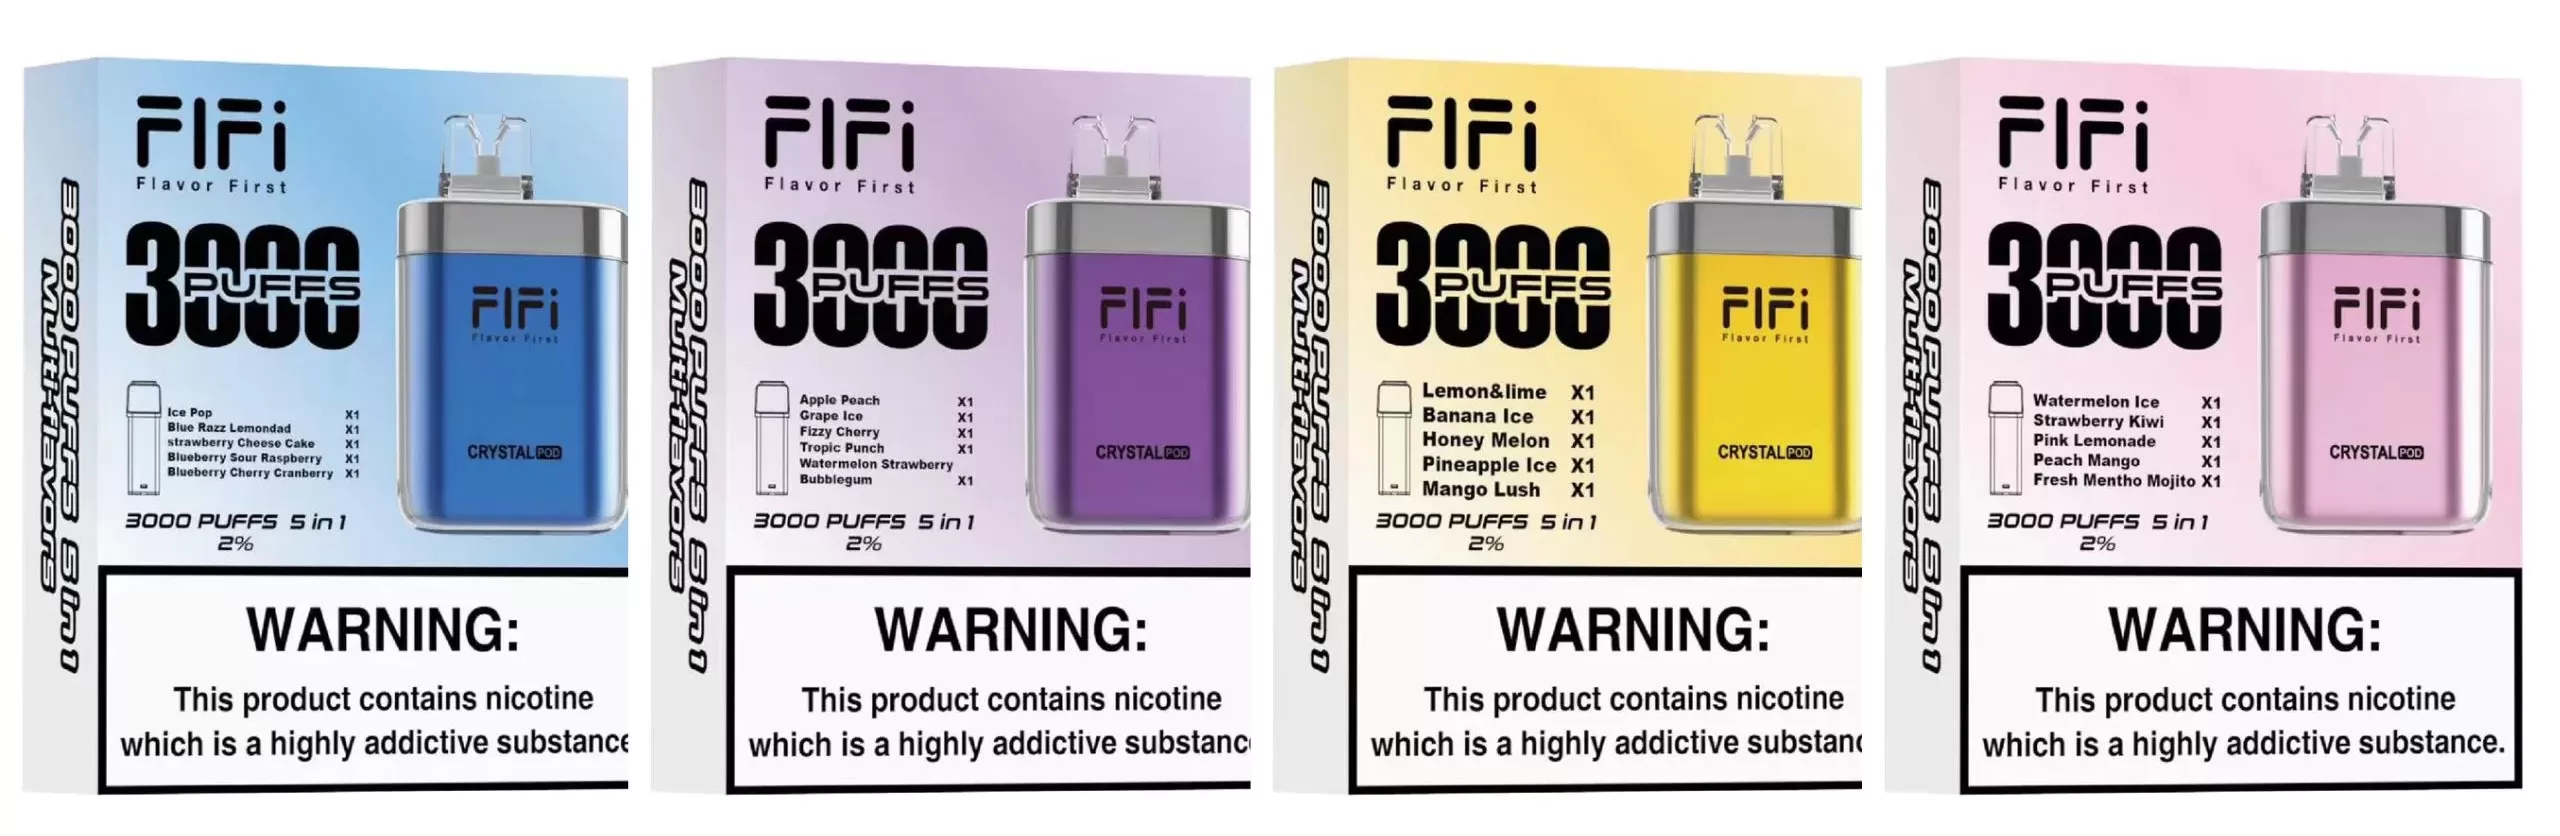 Fifi Crystal 3000 Flavours packs